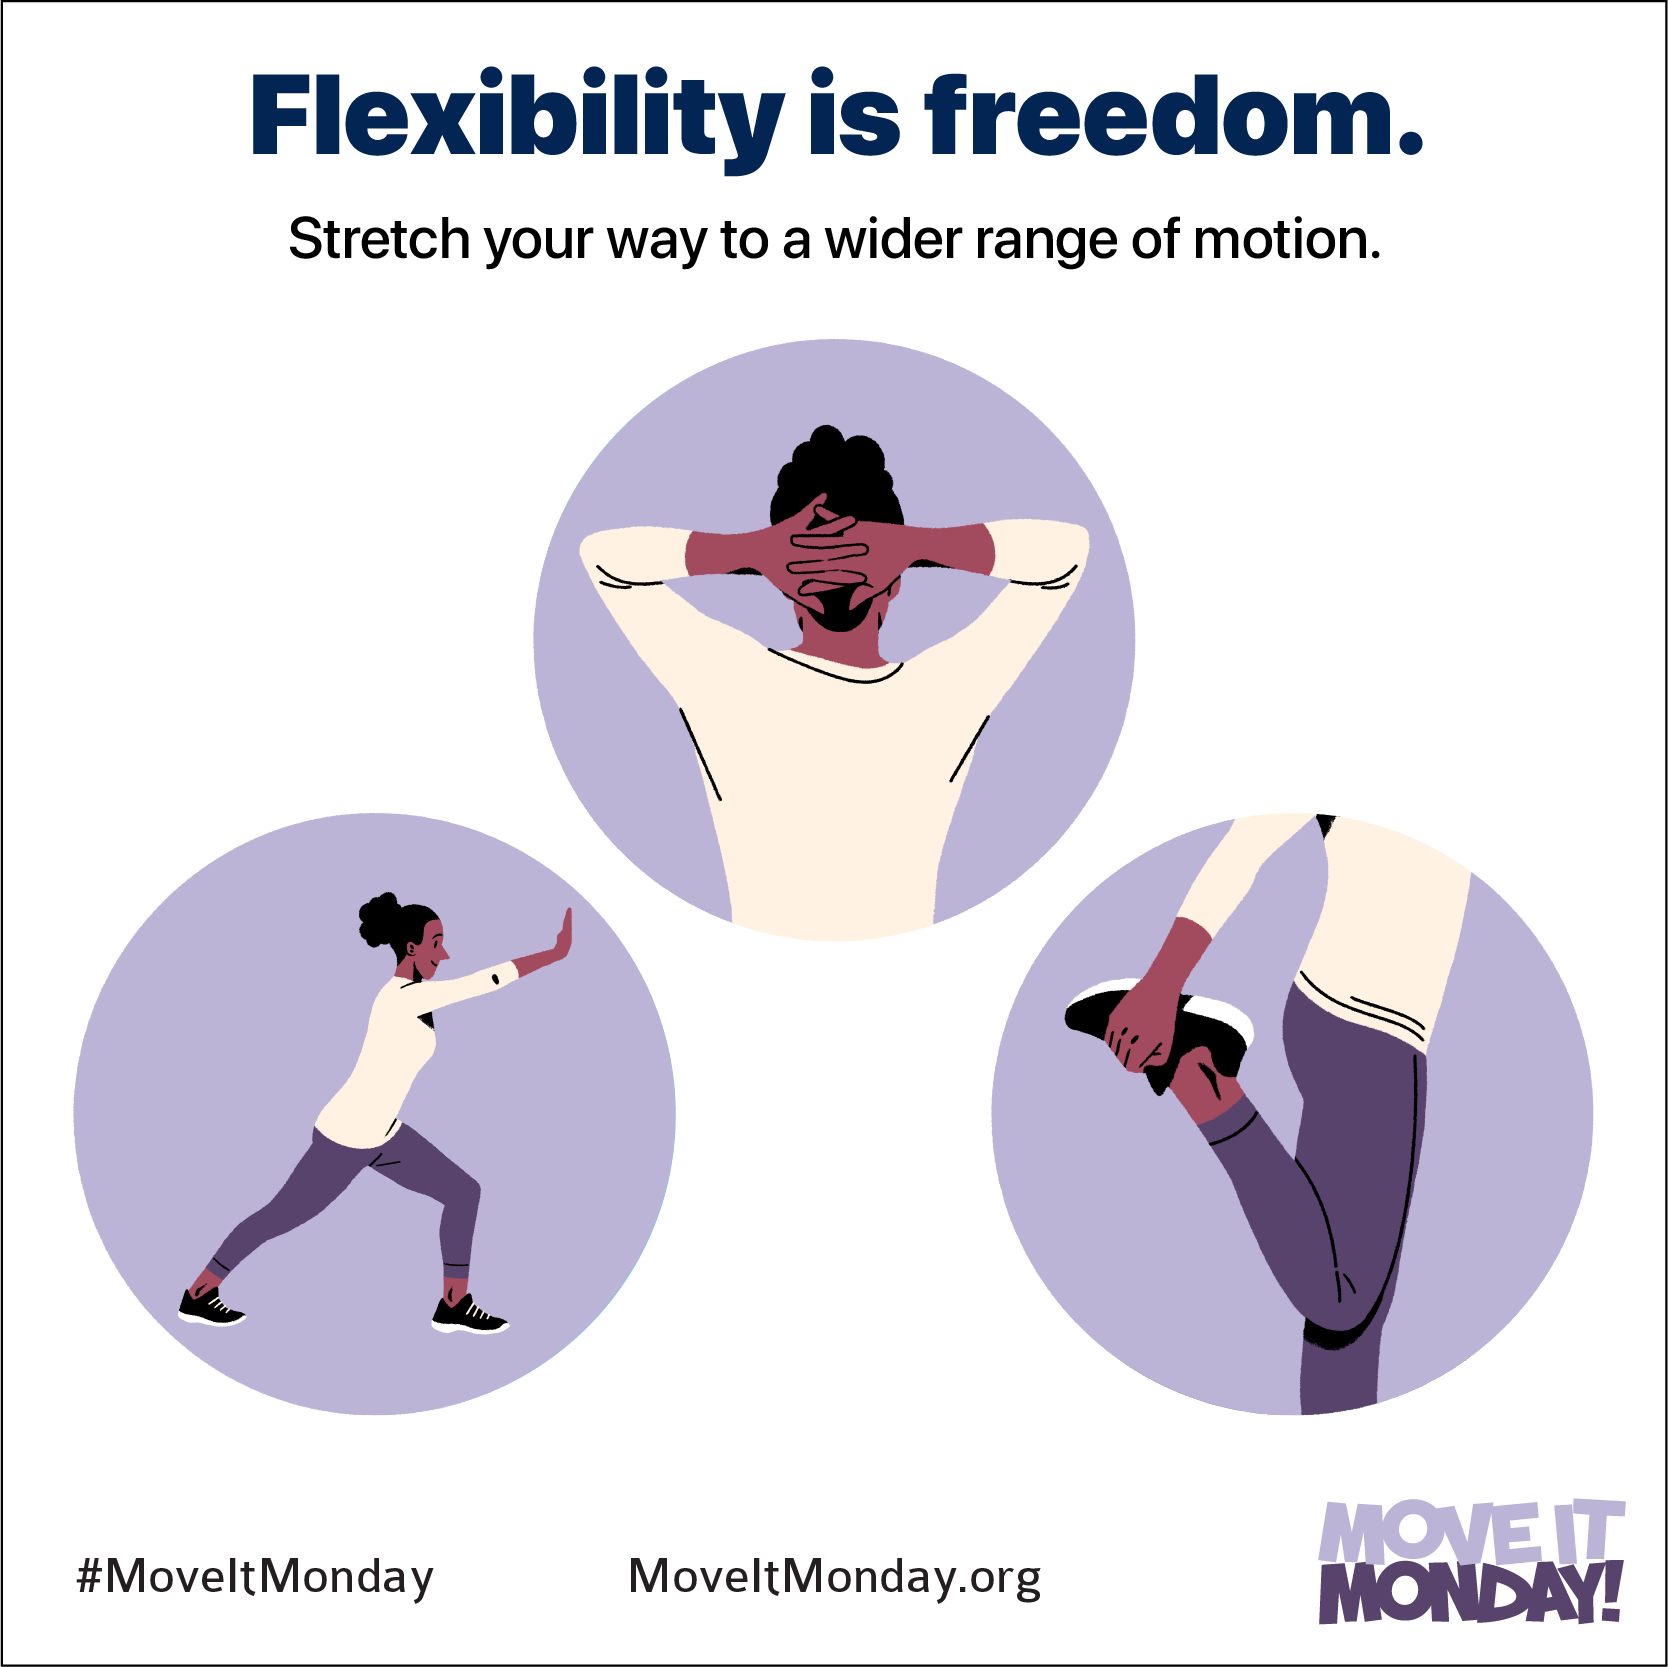 This Monday, Stretch Out to Increase Flexibility - The Monday